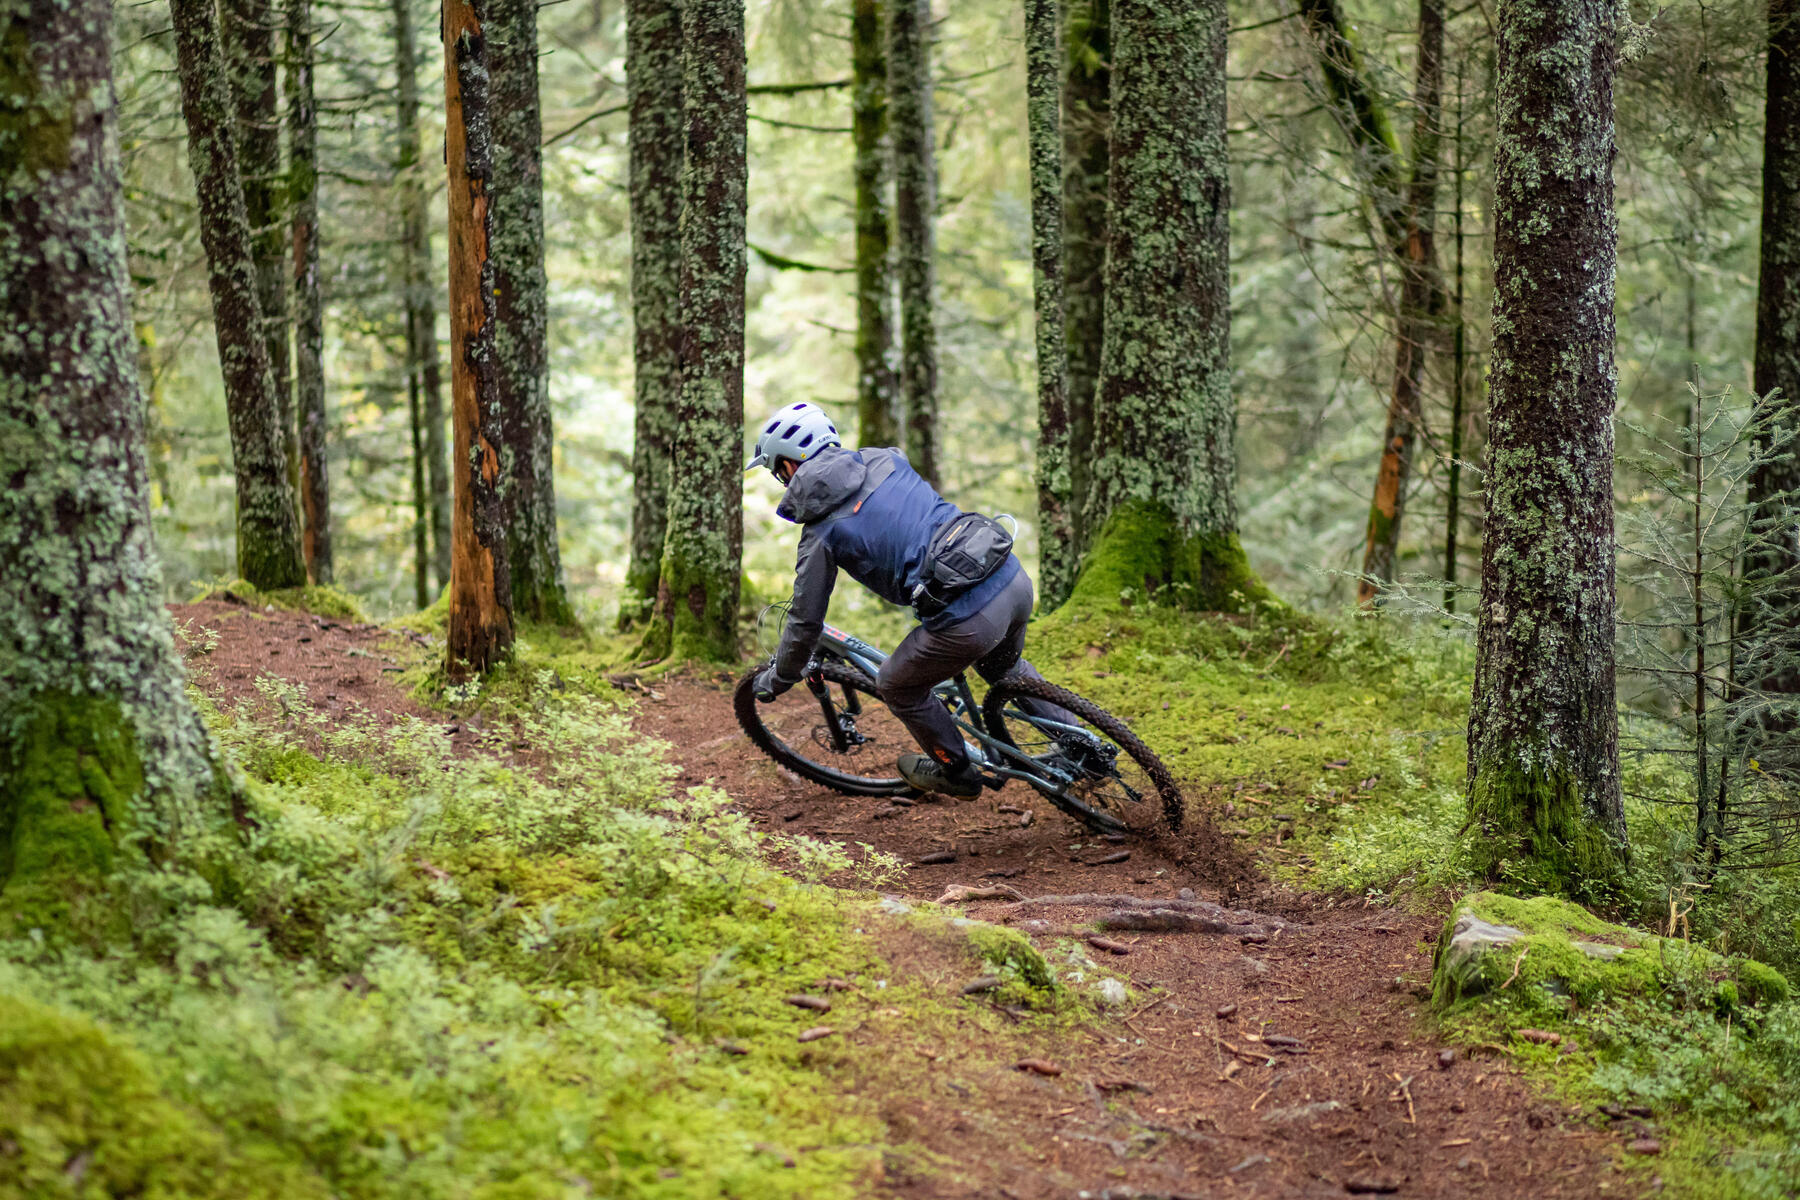 How To Choose a Mountain Bike : What Size Do I Need